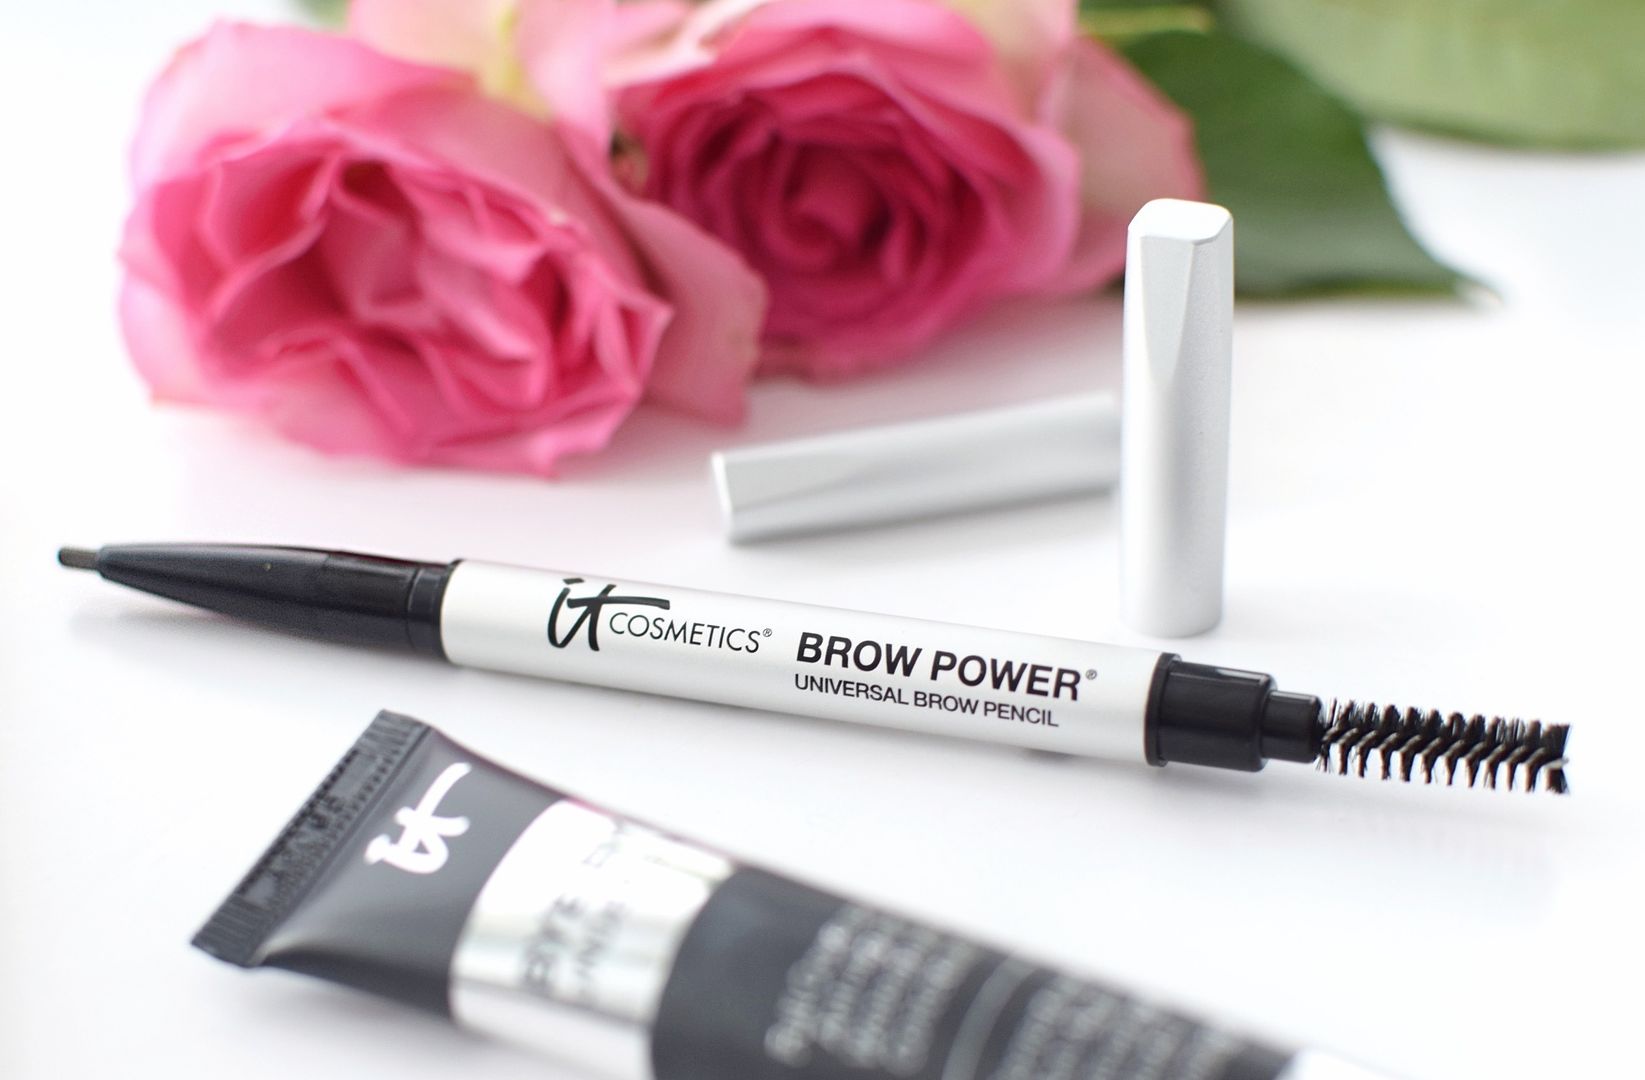 IT Cosmetics Universal Brow Power Pencil Review - UK Launch QVC